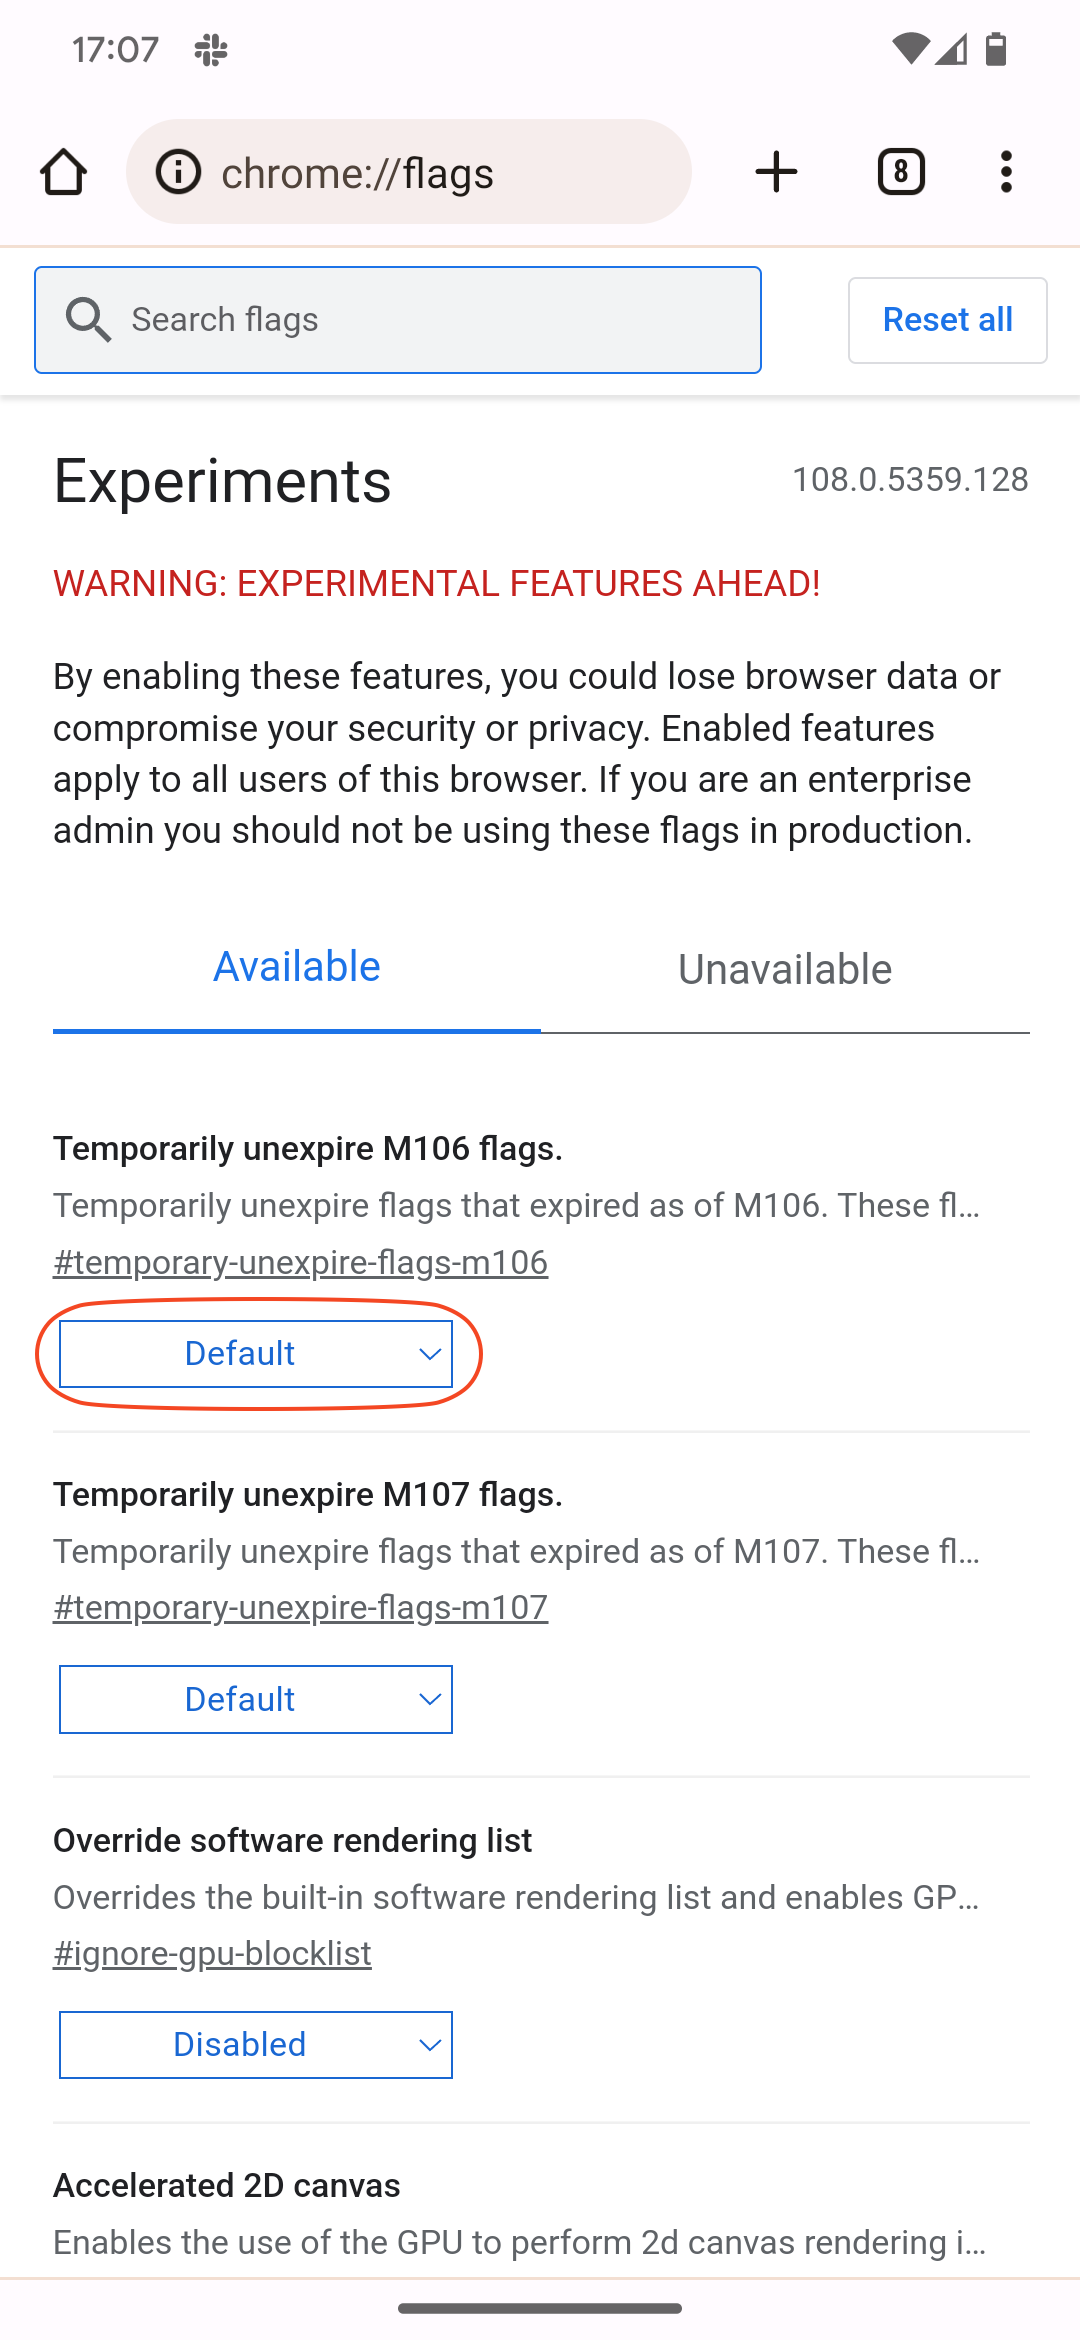 Chrome flags page showing the list of available experimental features 